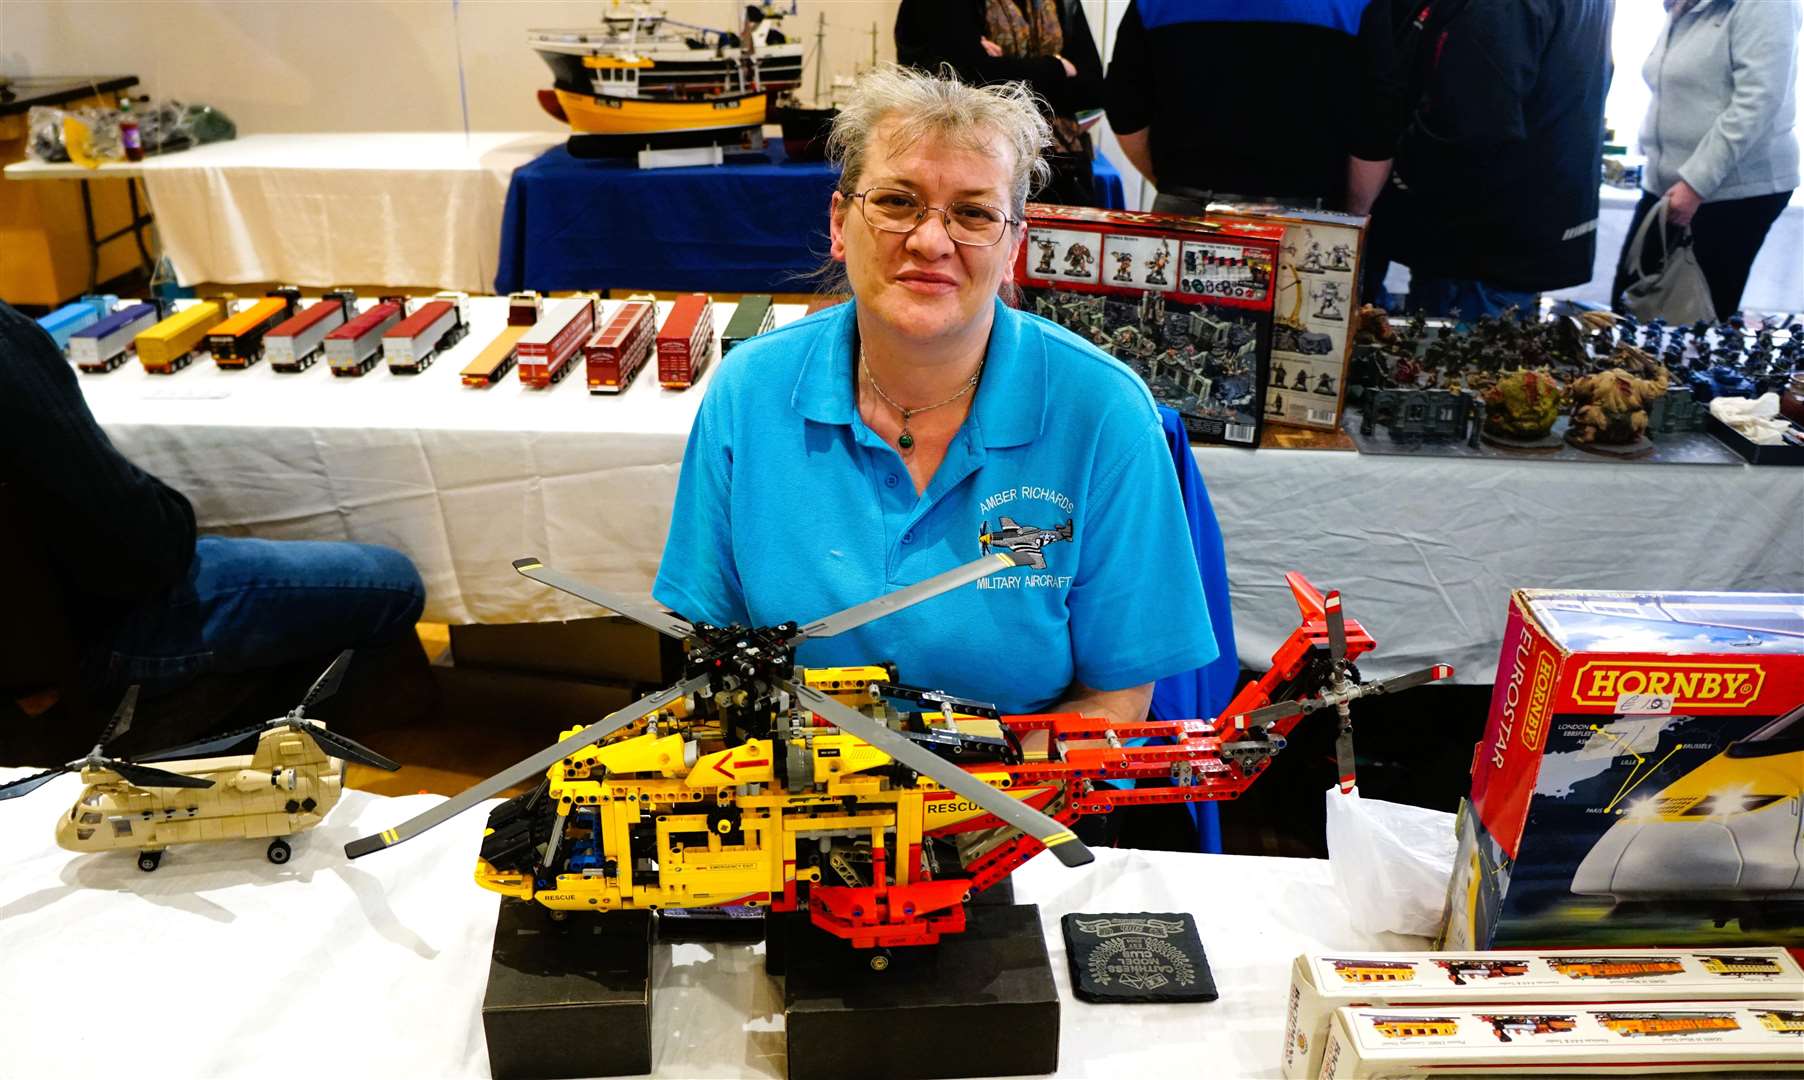 Amber Richards travelled from Oban with her Lego models of military aircraft. Picture: DGS